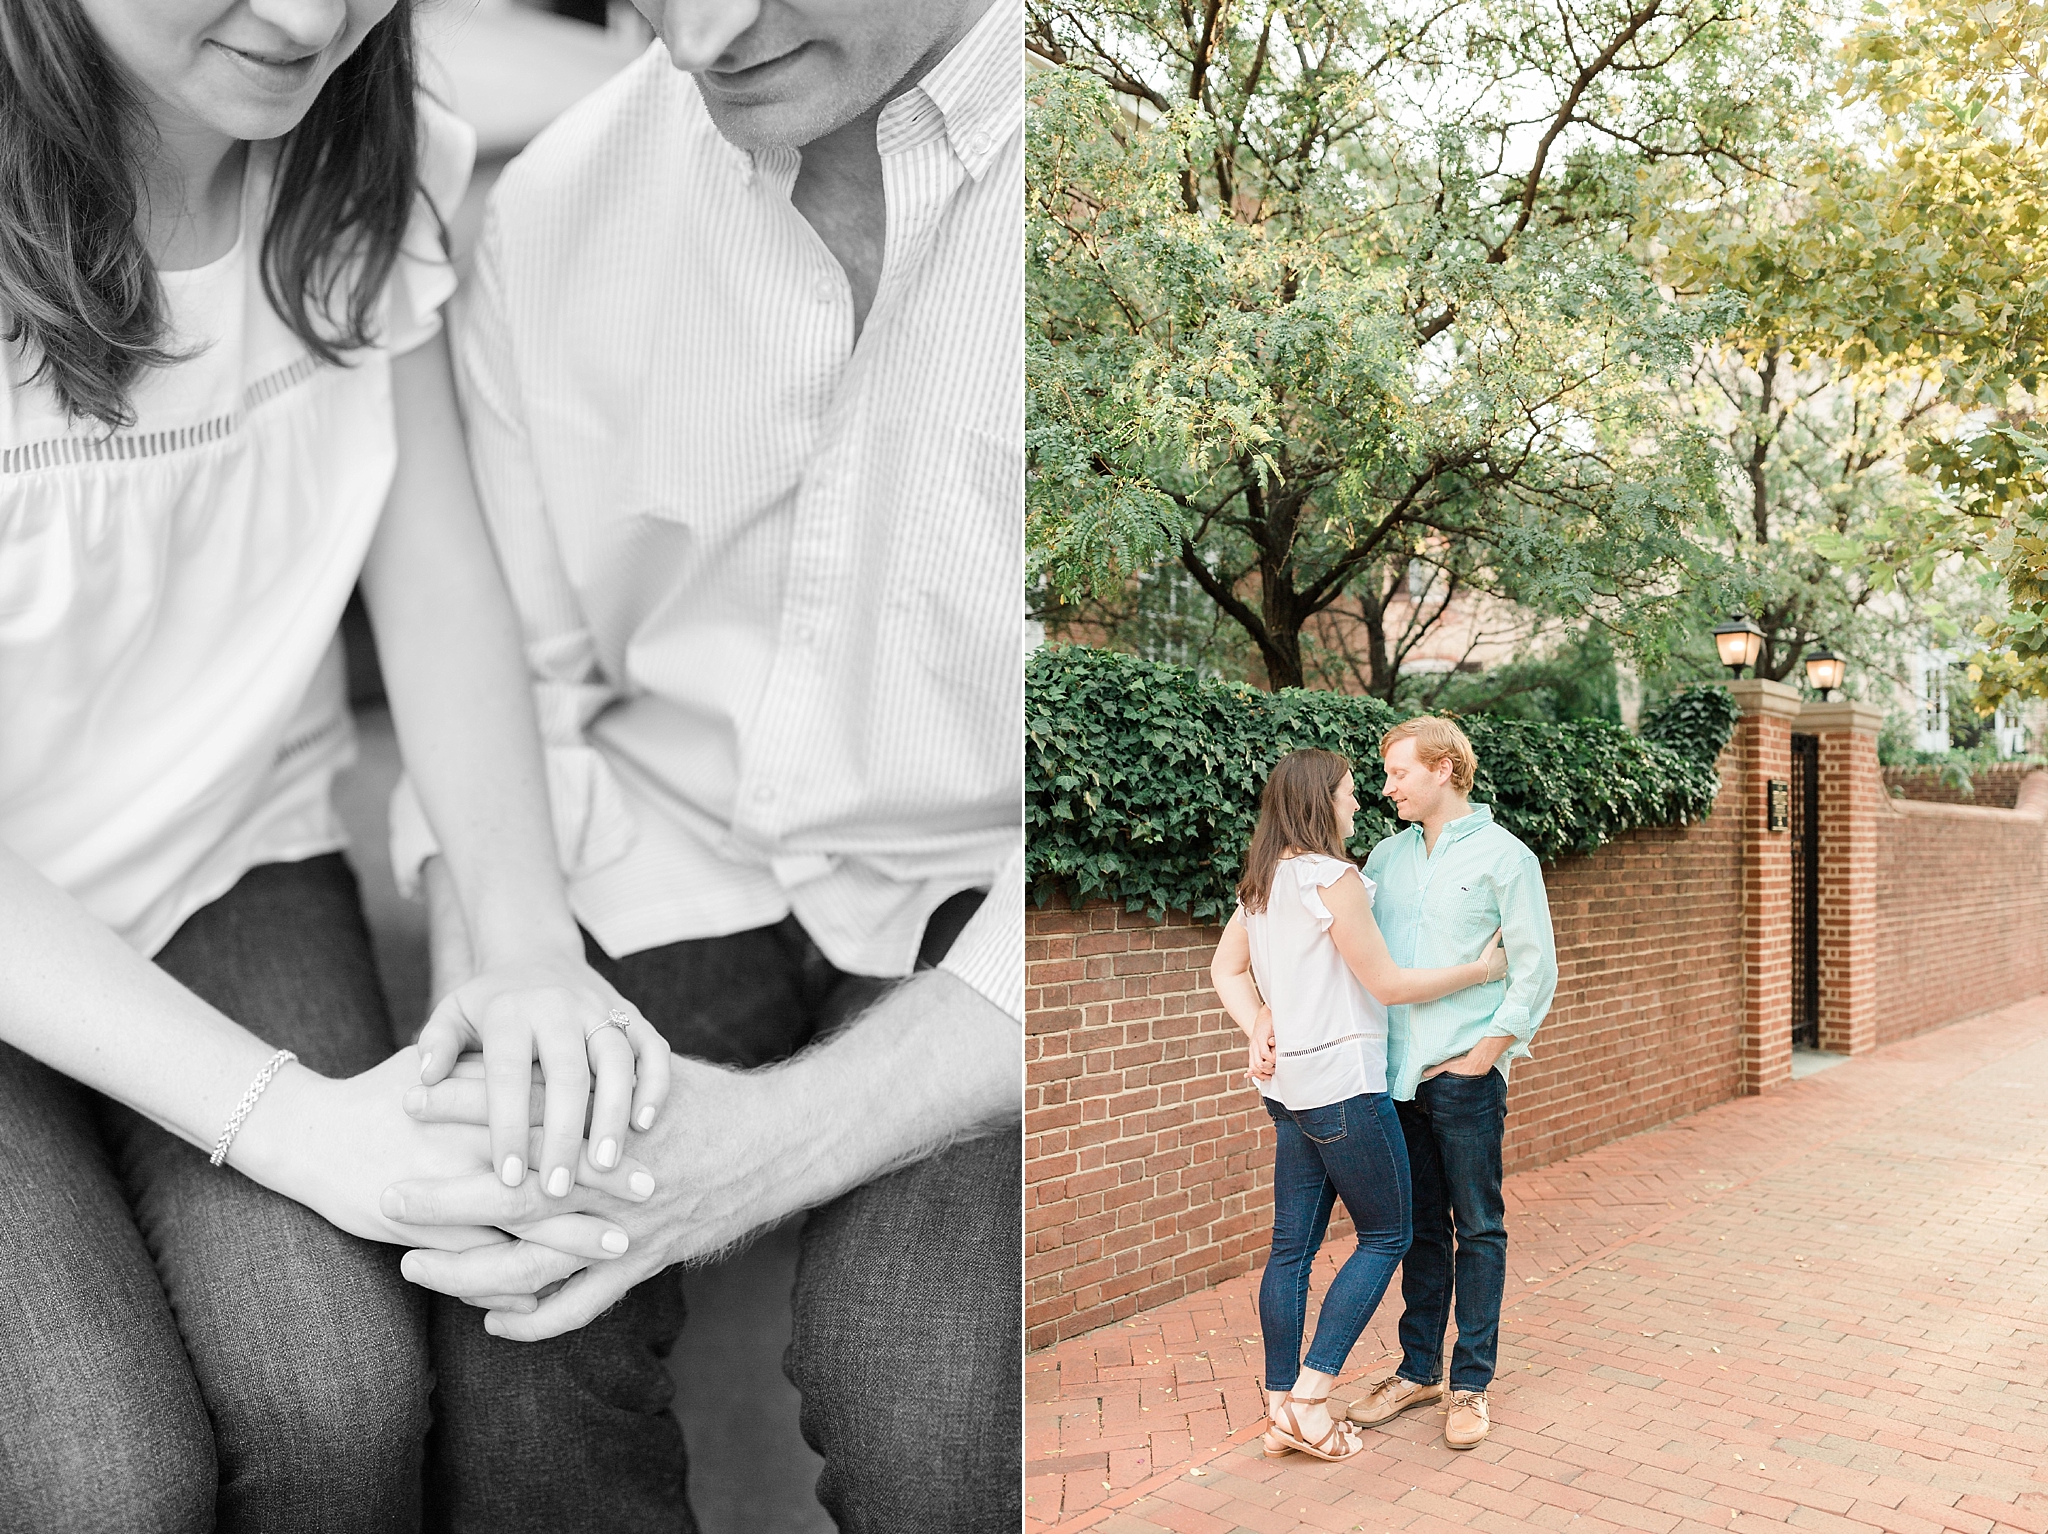 A romantic engagement session at Washington National Cathedral in DC is full of love, laughter, and lots of lush florals from the Bishop's Garden!